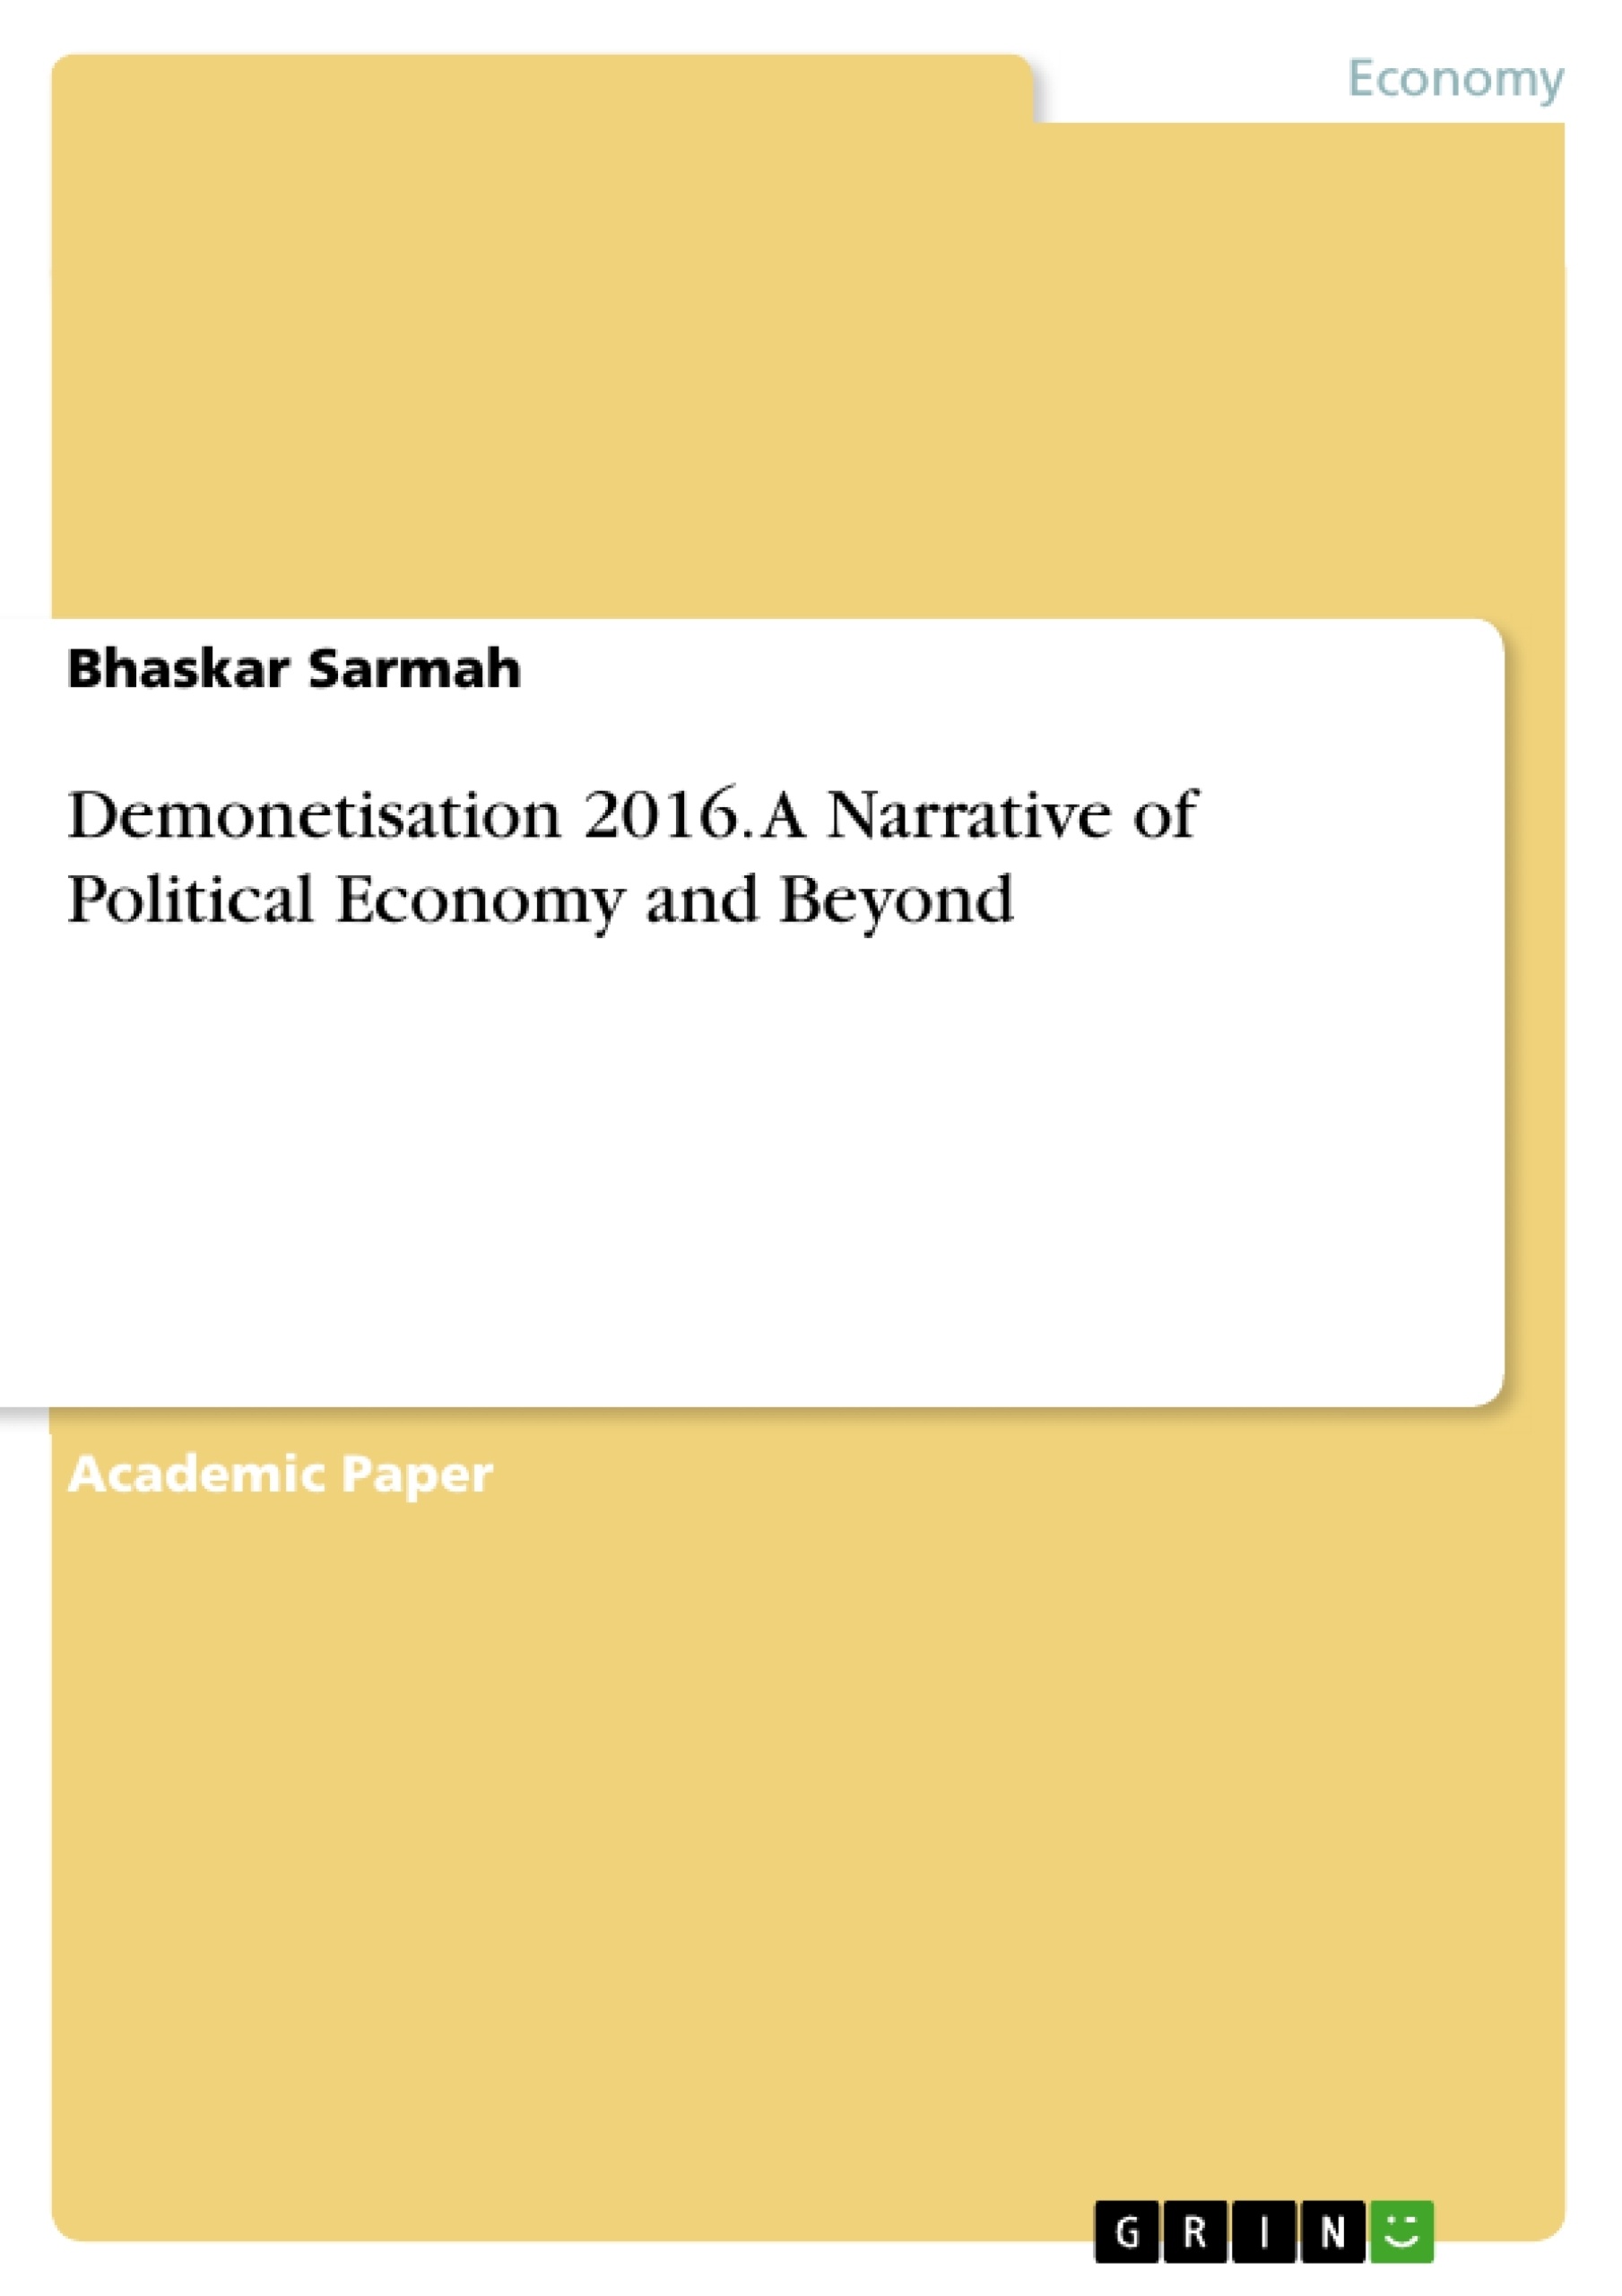 Title: Demonetisation 2016. A Narrative of Political Economy and Beyond